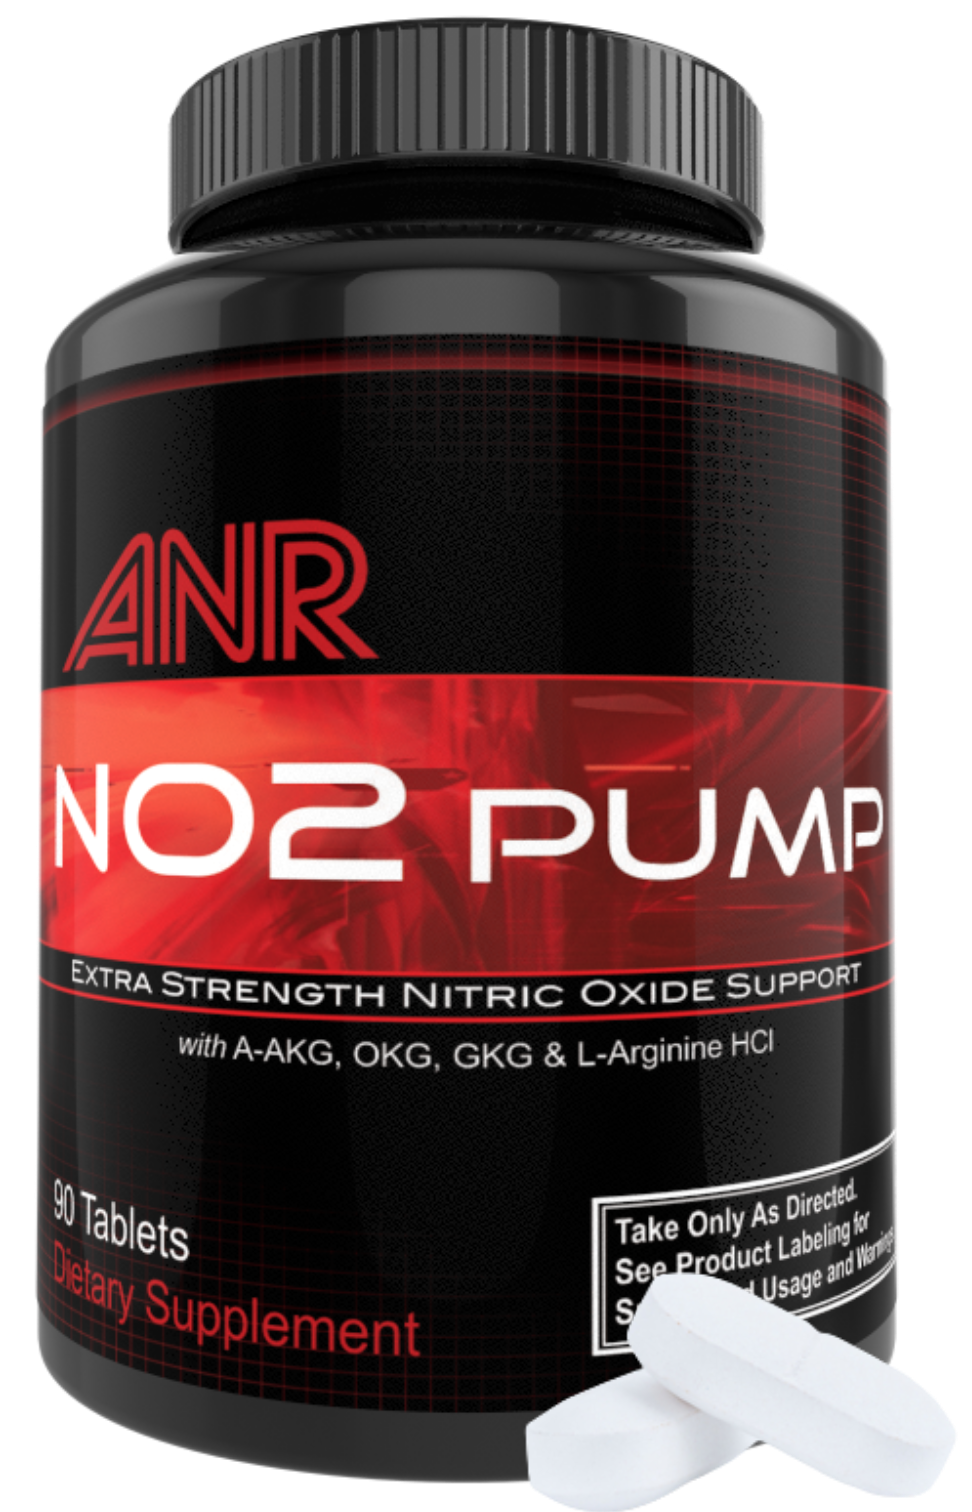 N02 PUMP Extra-Strength Nitric Oxide Booster - TeamANR